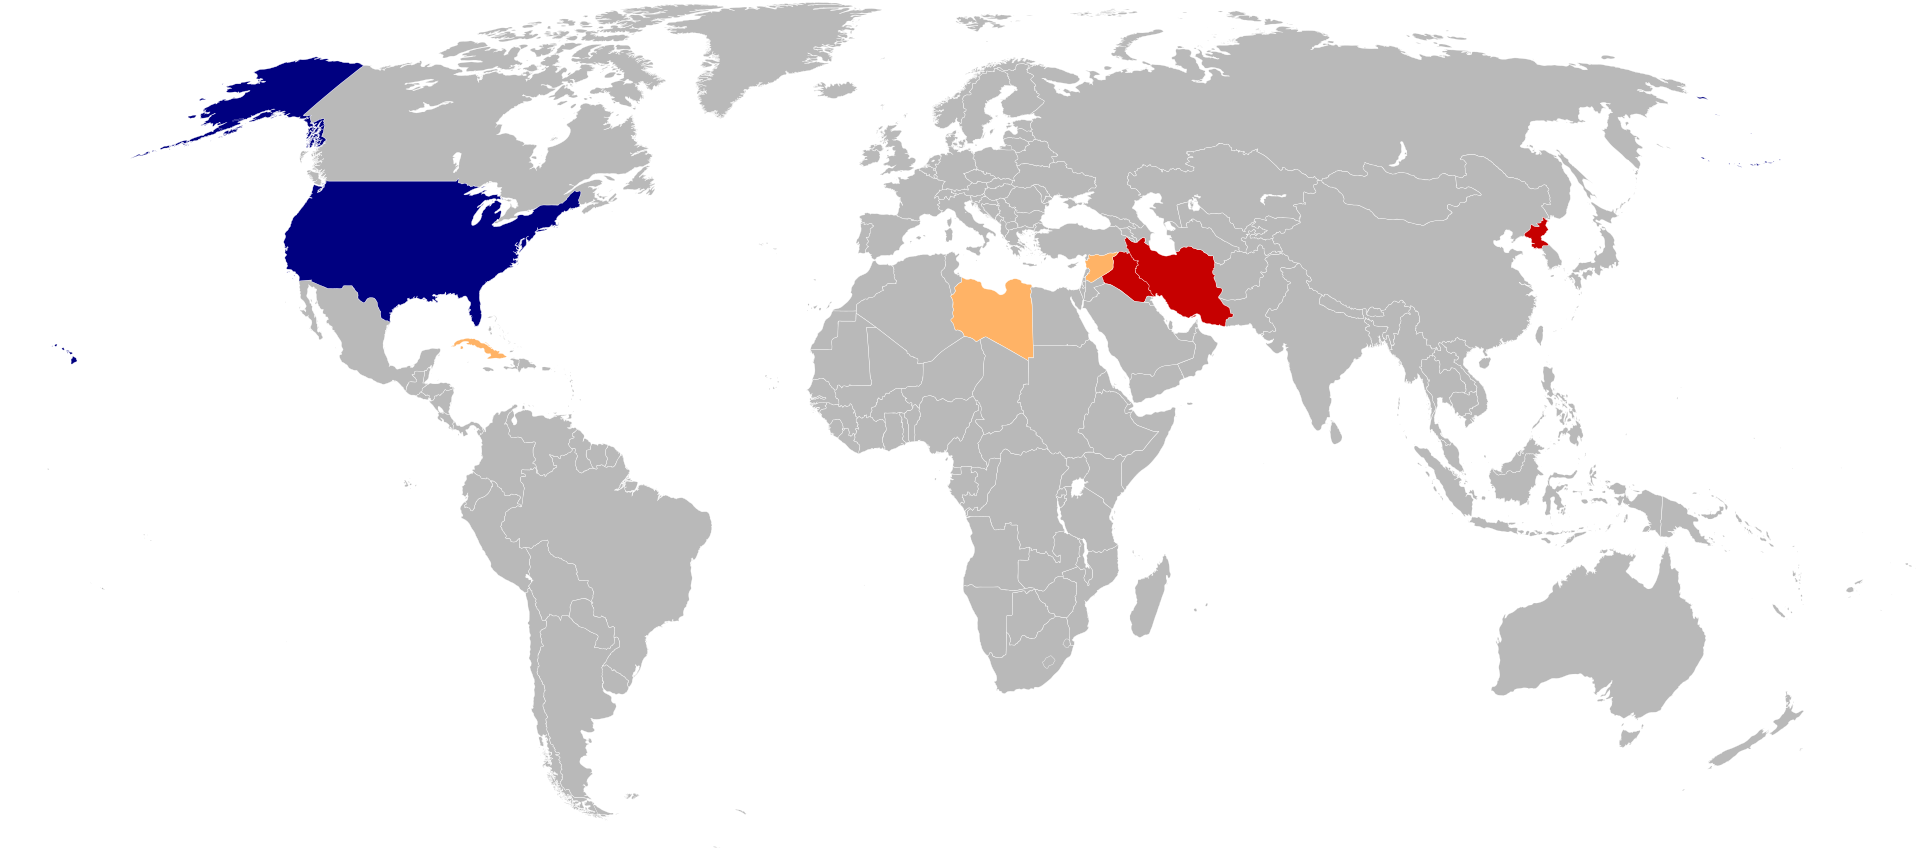 Axis_of_Evil_map.svg.png